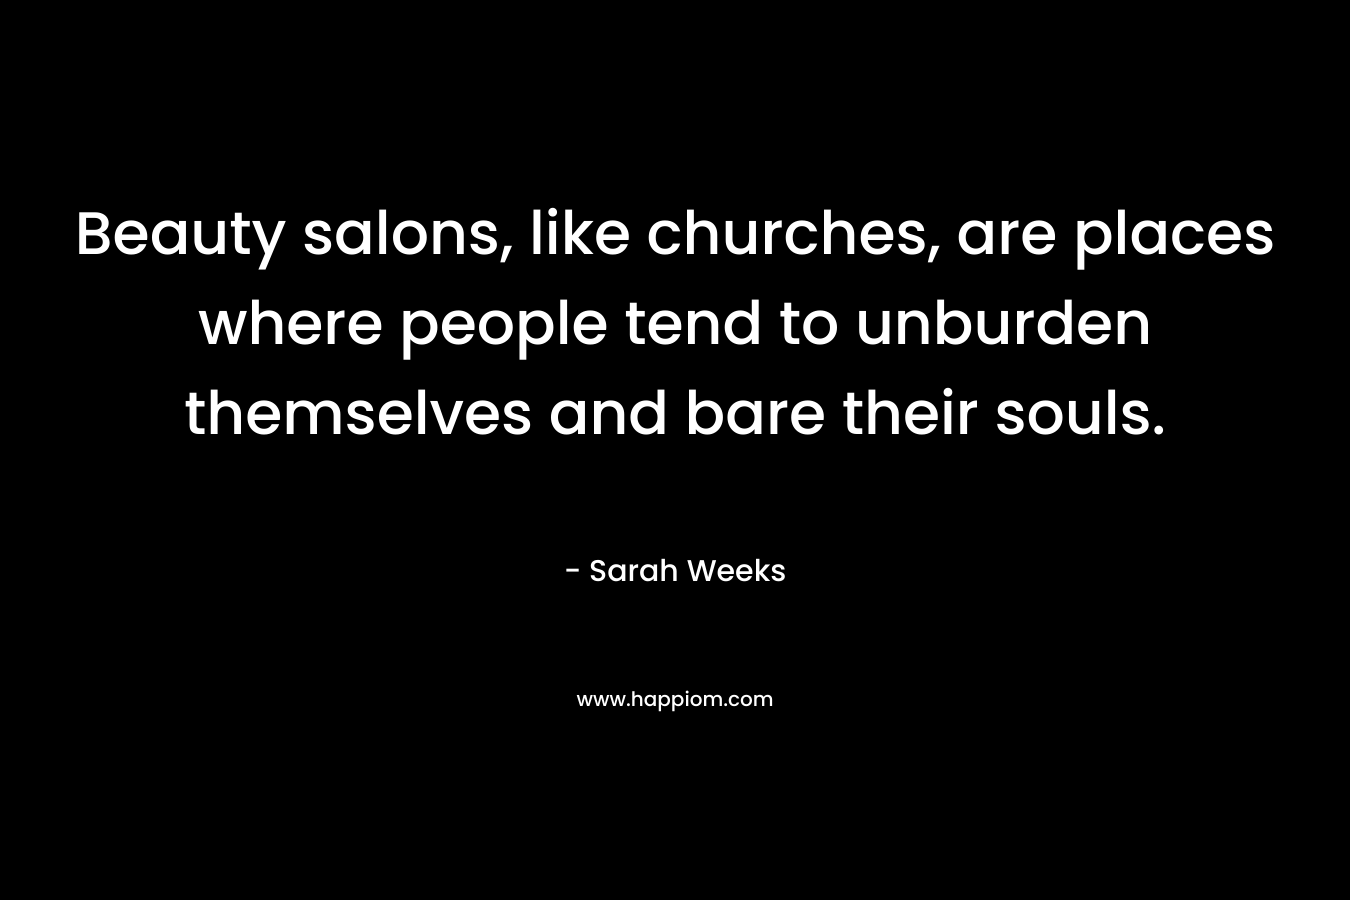 Beauty salons, like churches, are places where people tend to unburden themselves and bare their souls. – Sarah Weeks